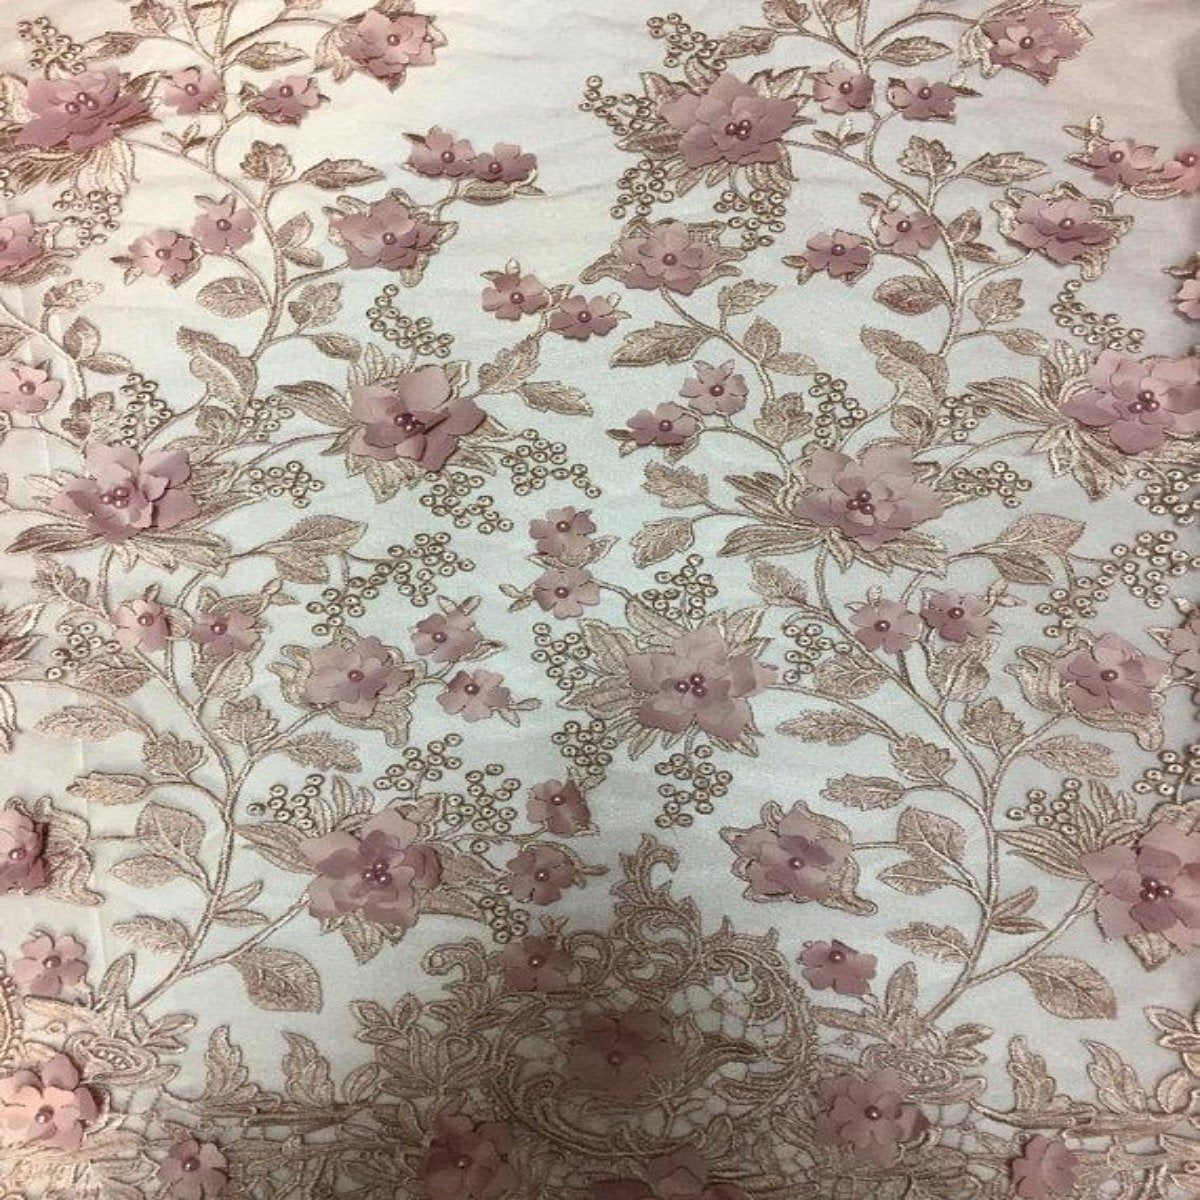 Dusty Rose 3D Embroidered Satin Floral Pearl Lace Fabric - Fashion Fabrics LLC